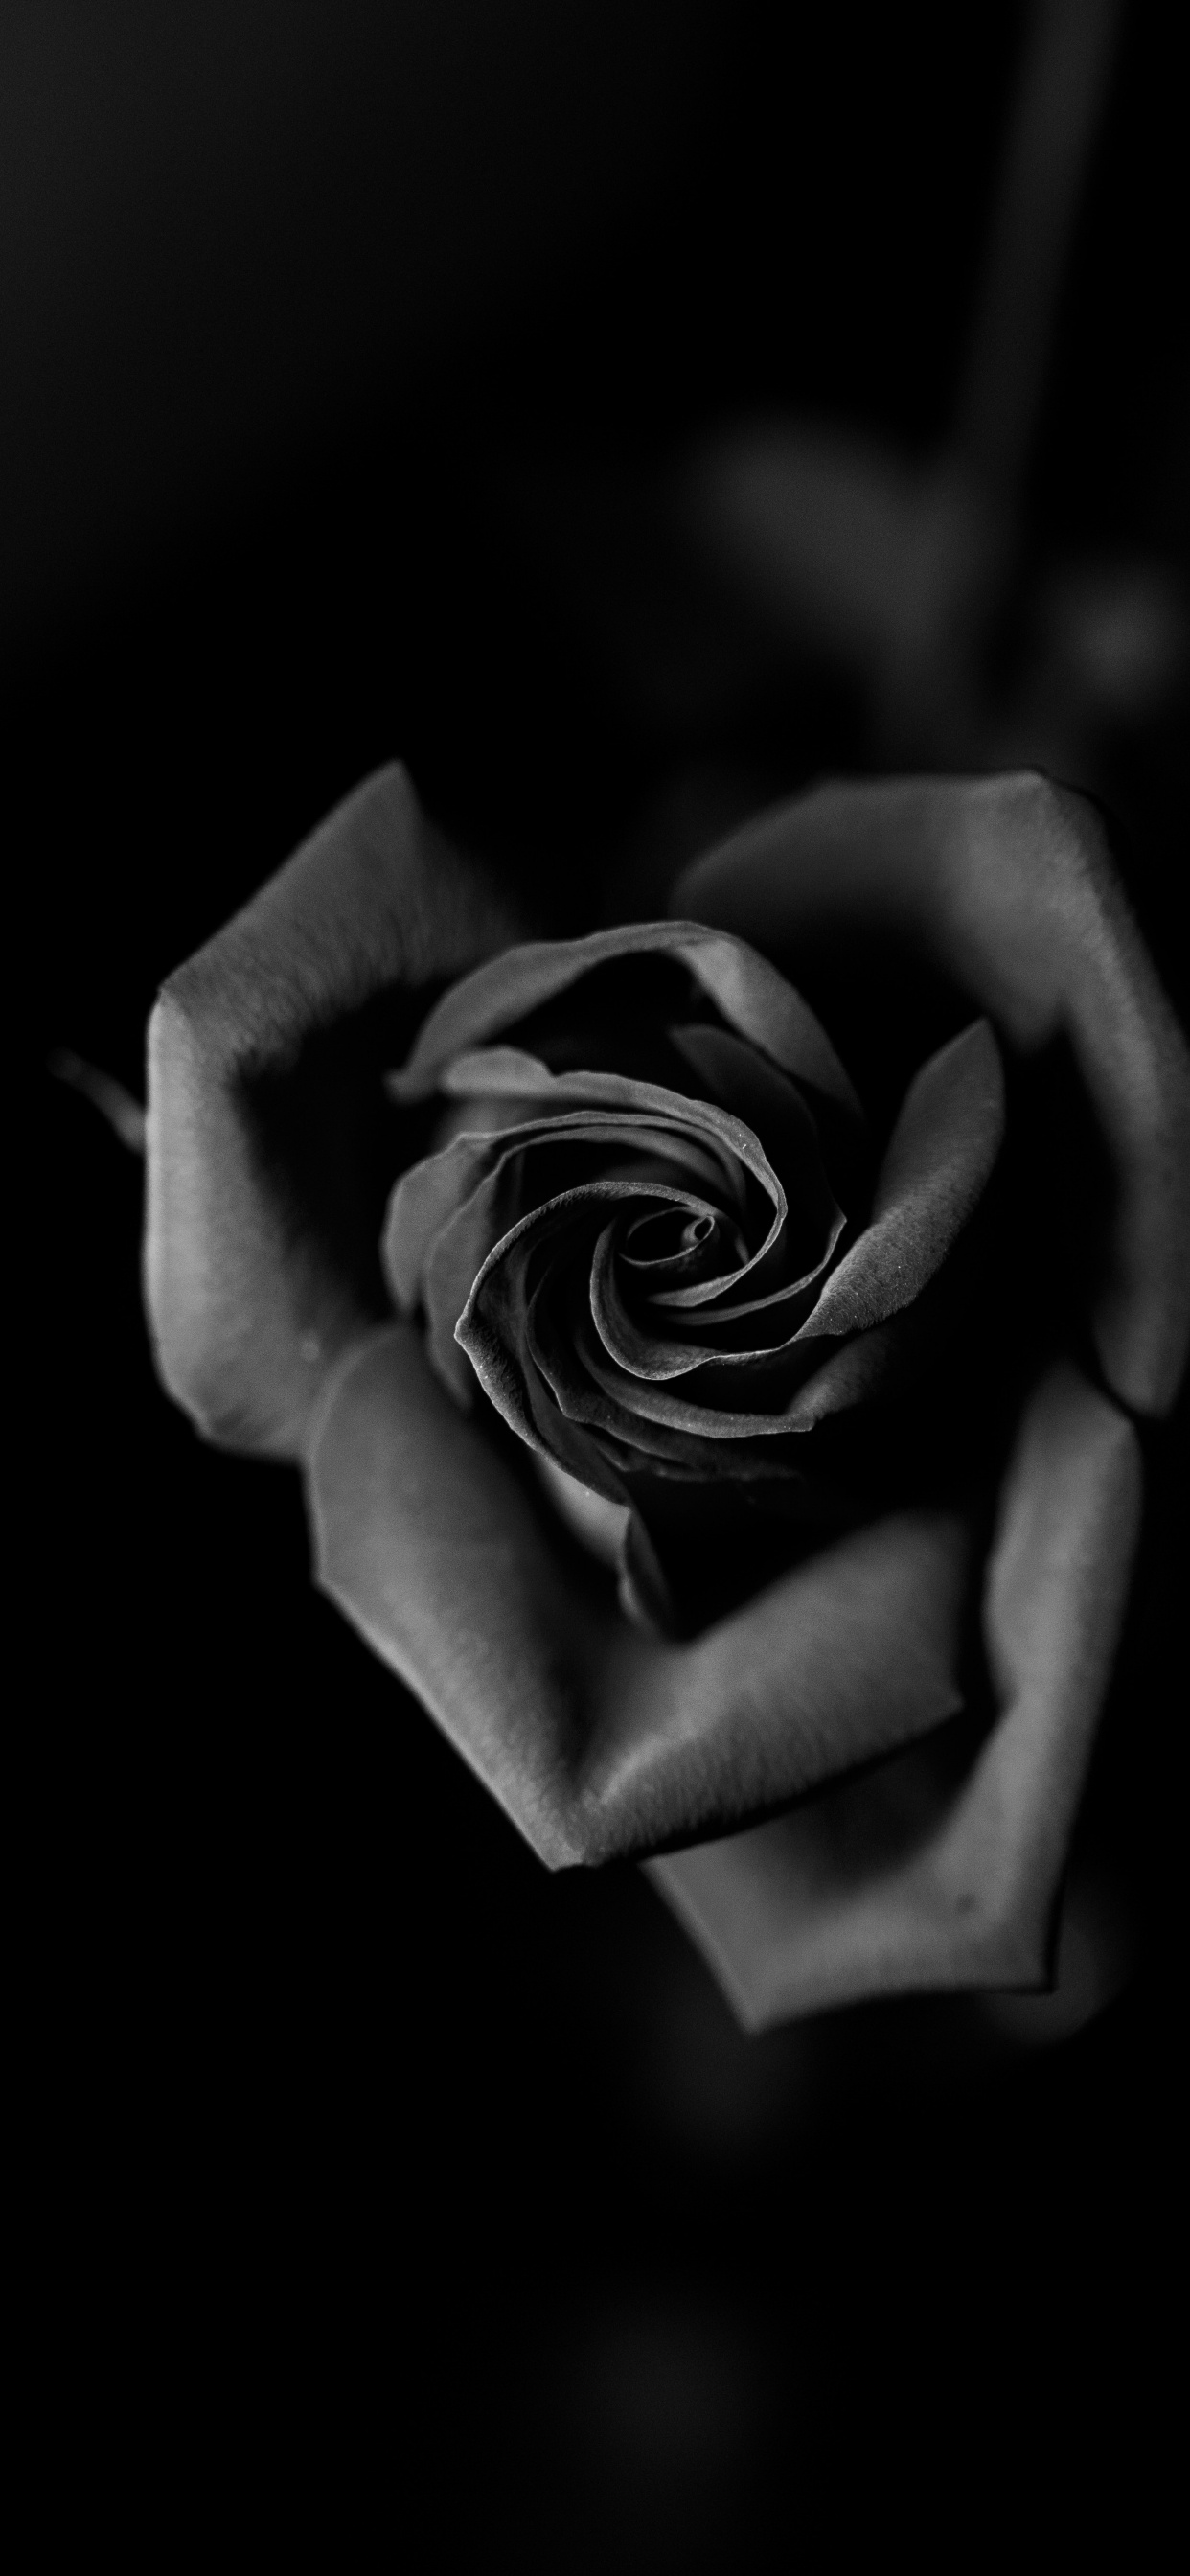 Grayscale Photo of Rose Flower. Wallpaper in 1242x2688 Resolution